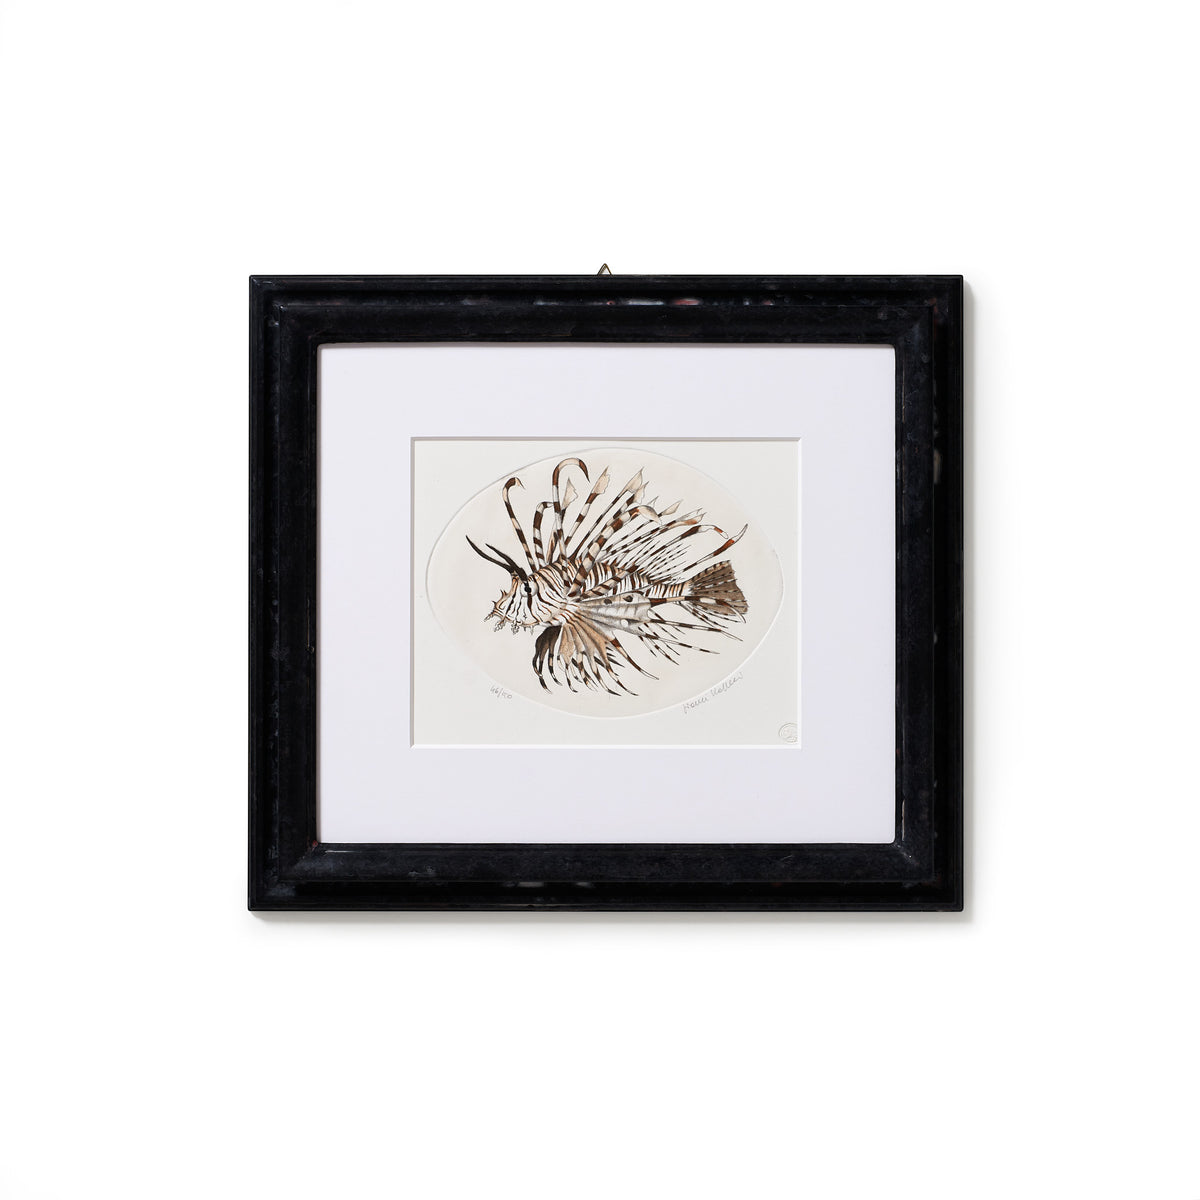 ippogrifo-artisan-etching-acquaforte-watercolor-lion-fish